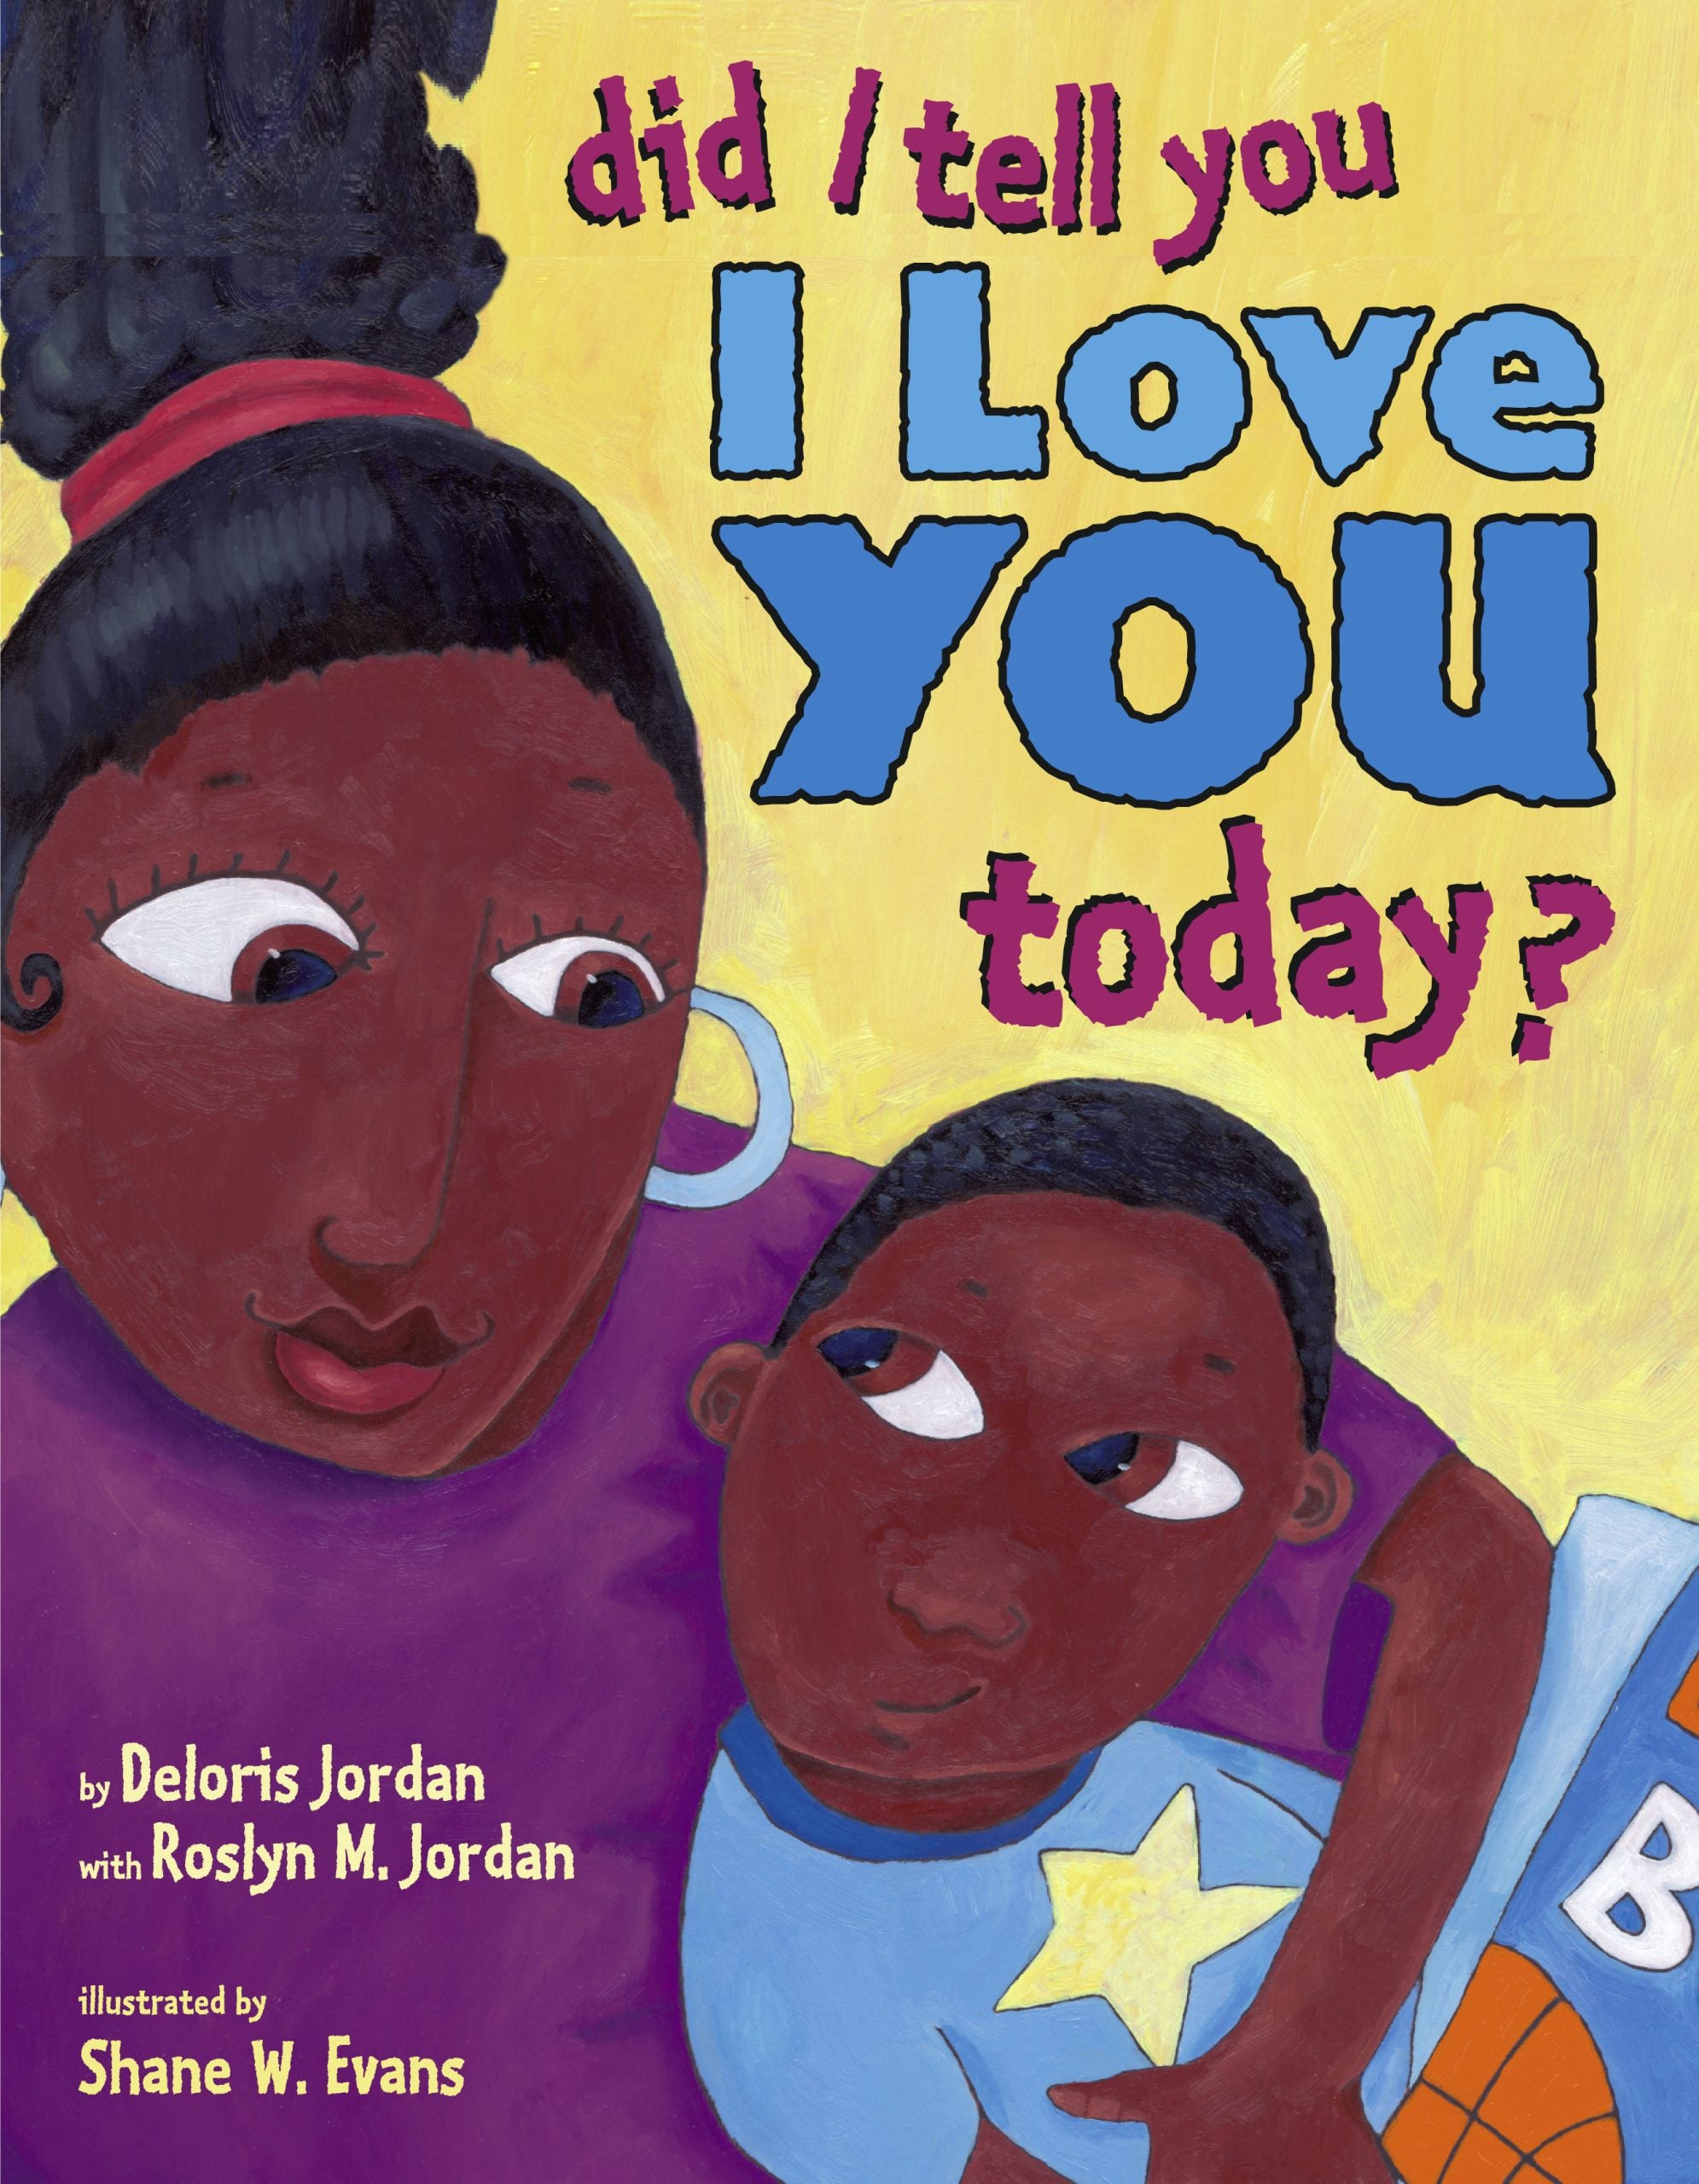 ESSENCE Staffers Reveal Their Favorite Children’s Books By Black Authors